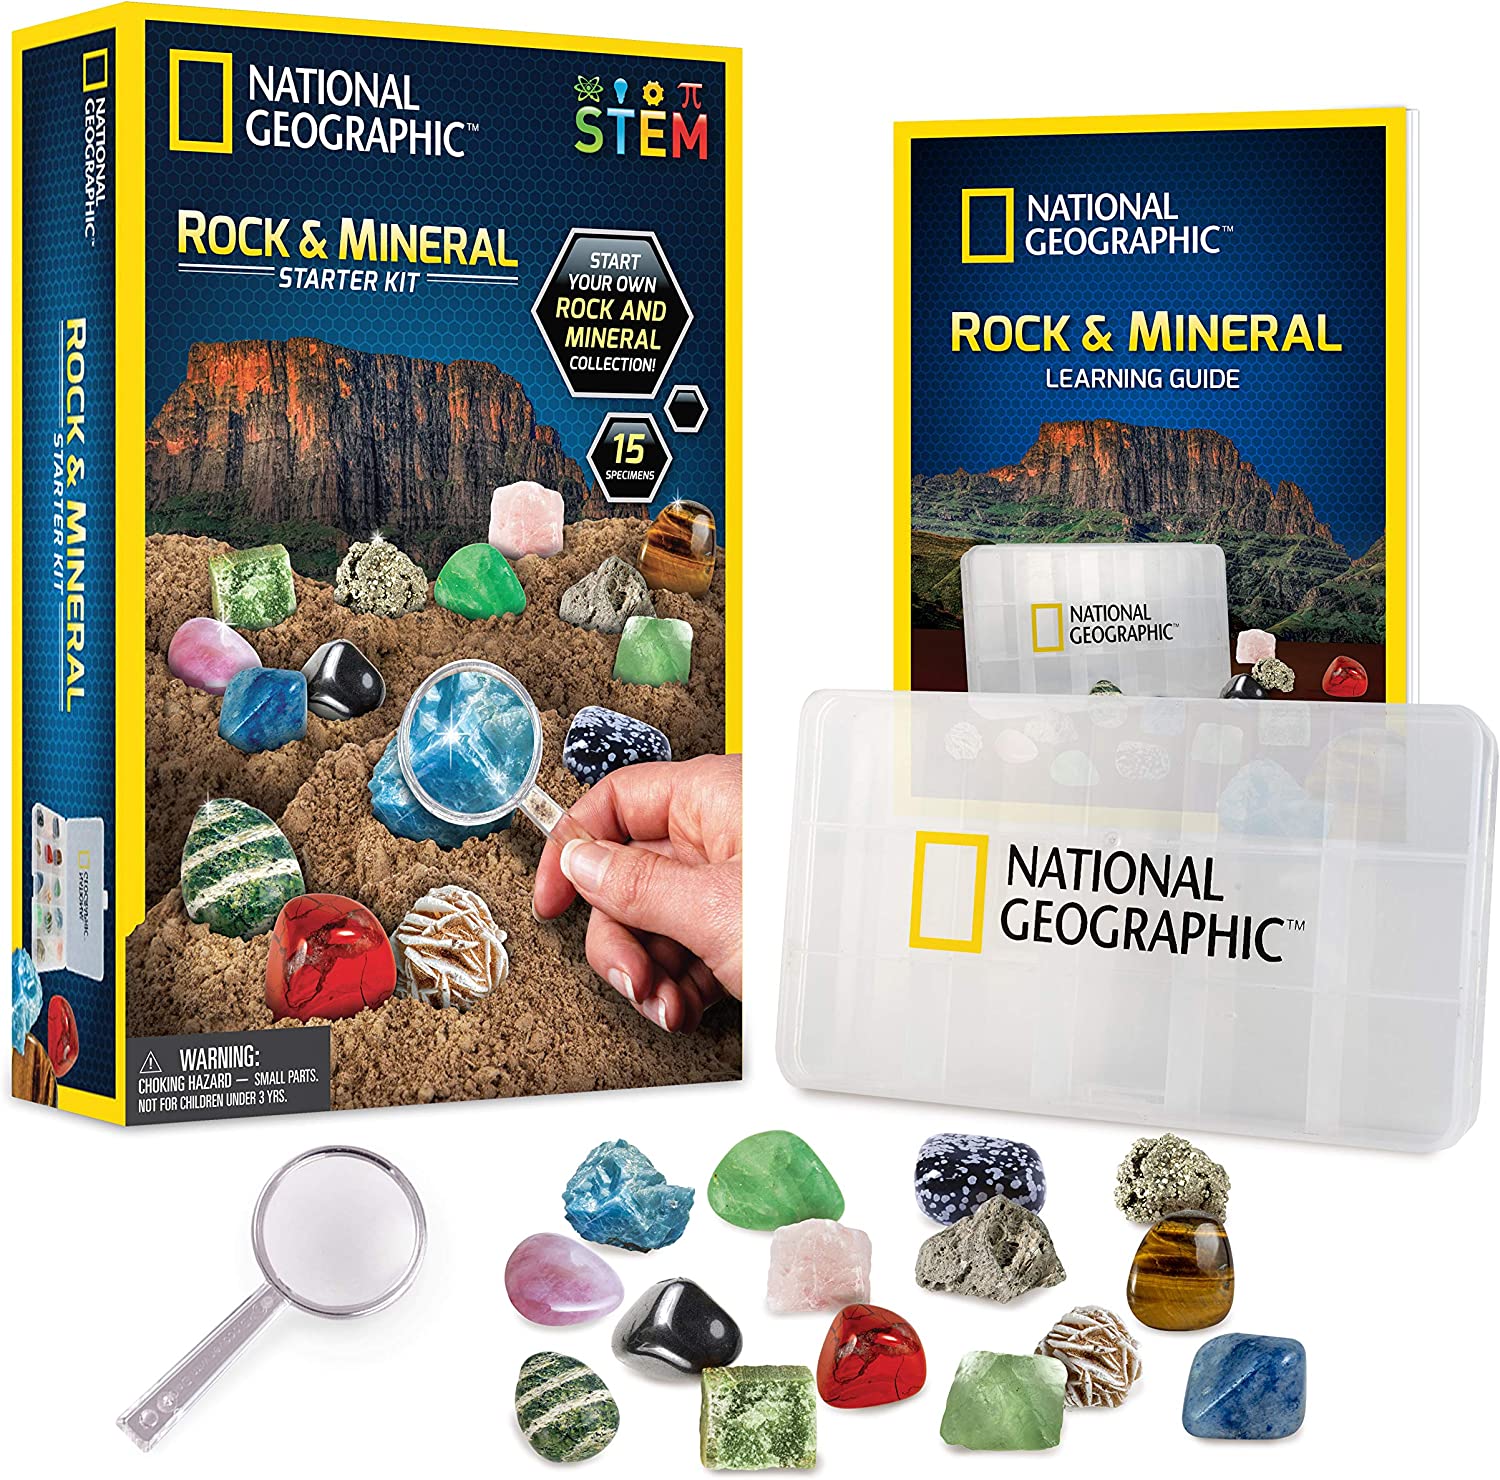 The National Geographic Explorer Science Series Earth Science Kit